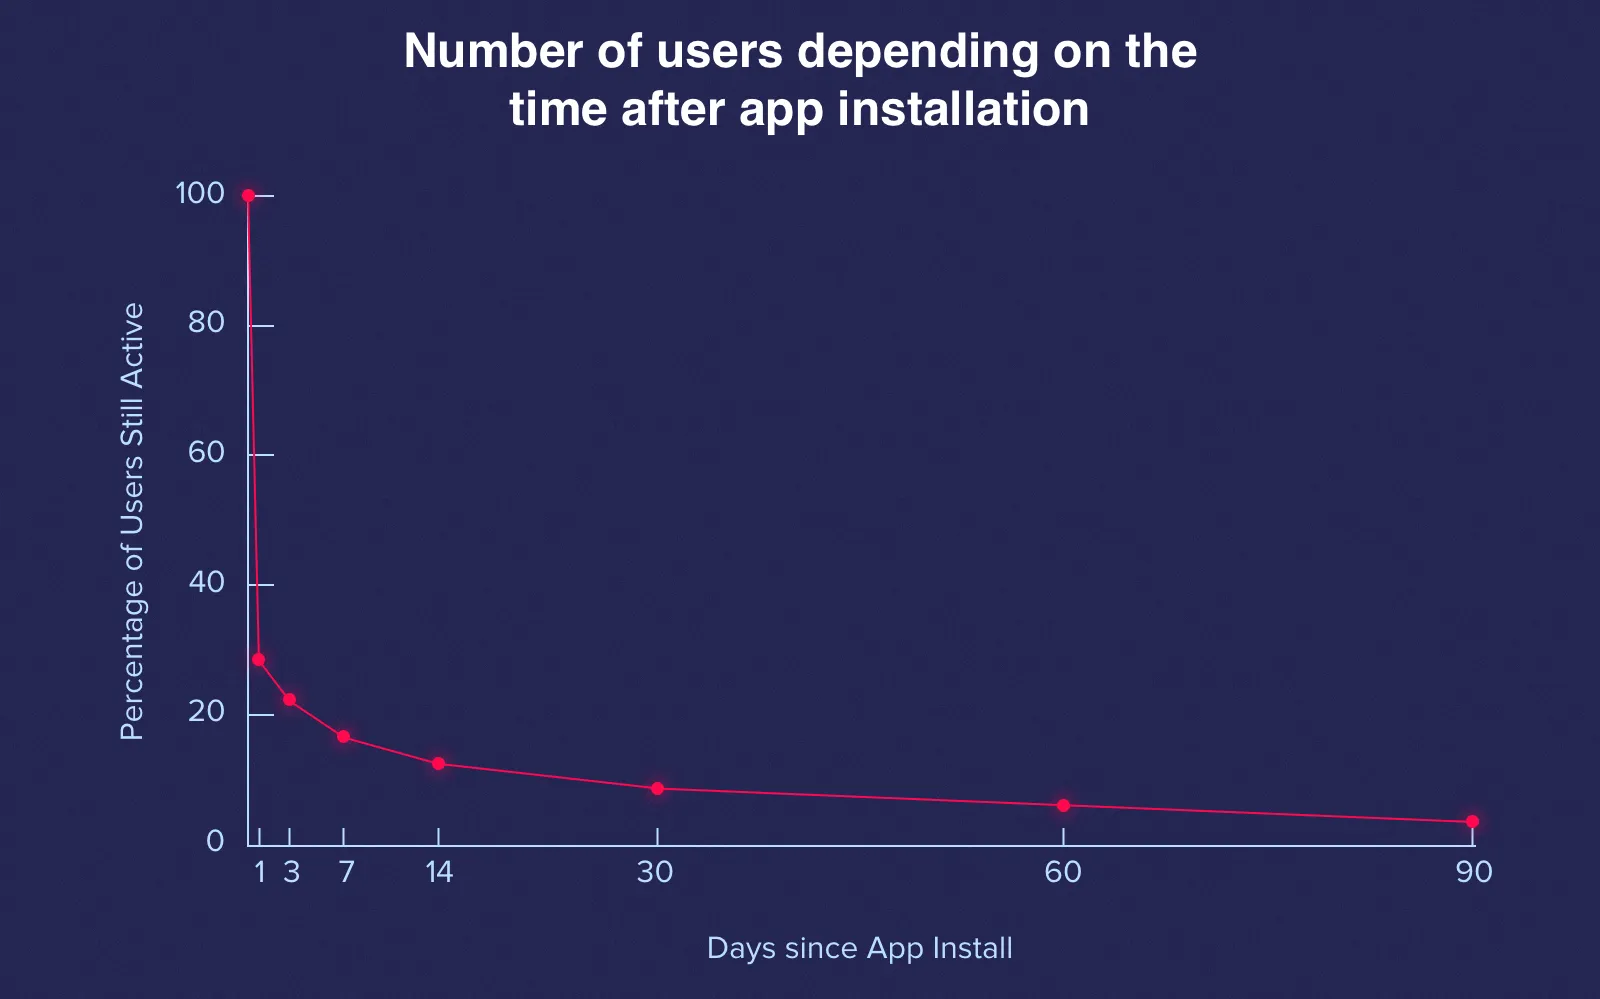 The number of users depending on the time after app installation